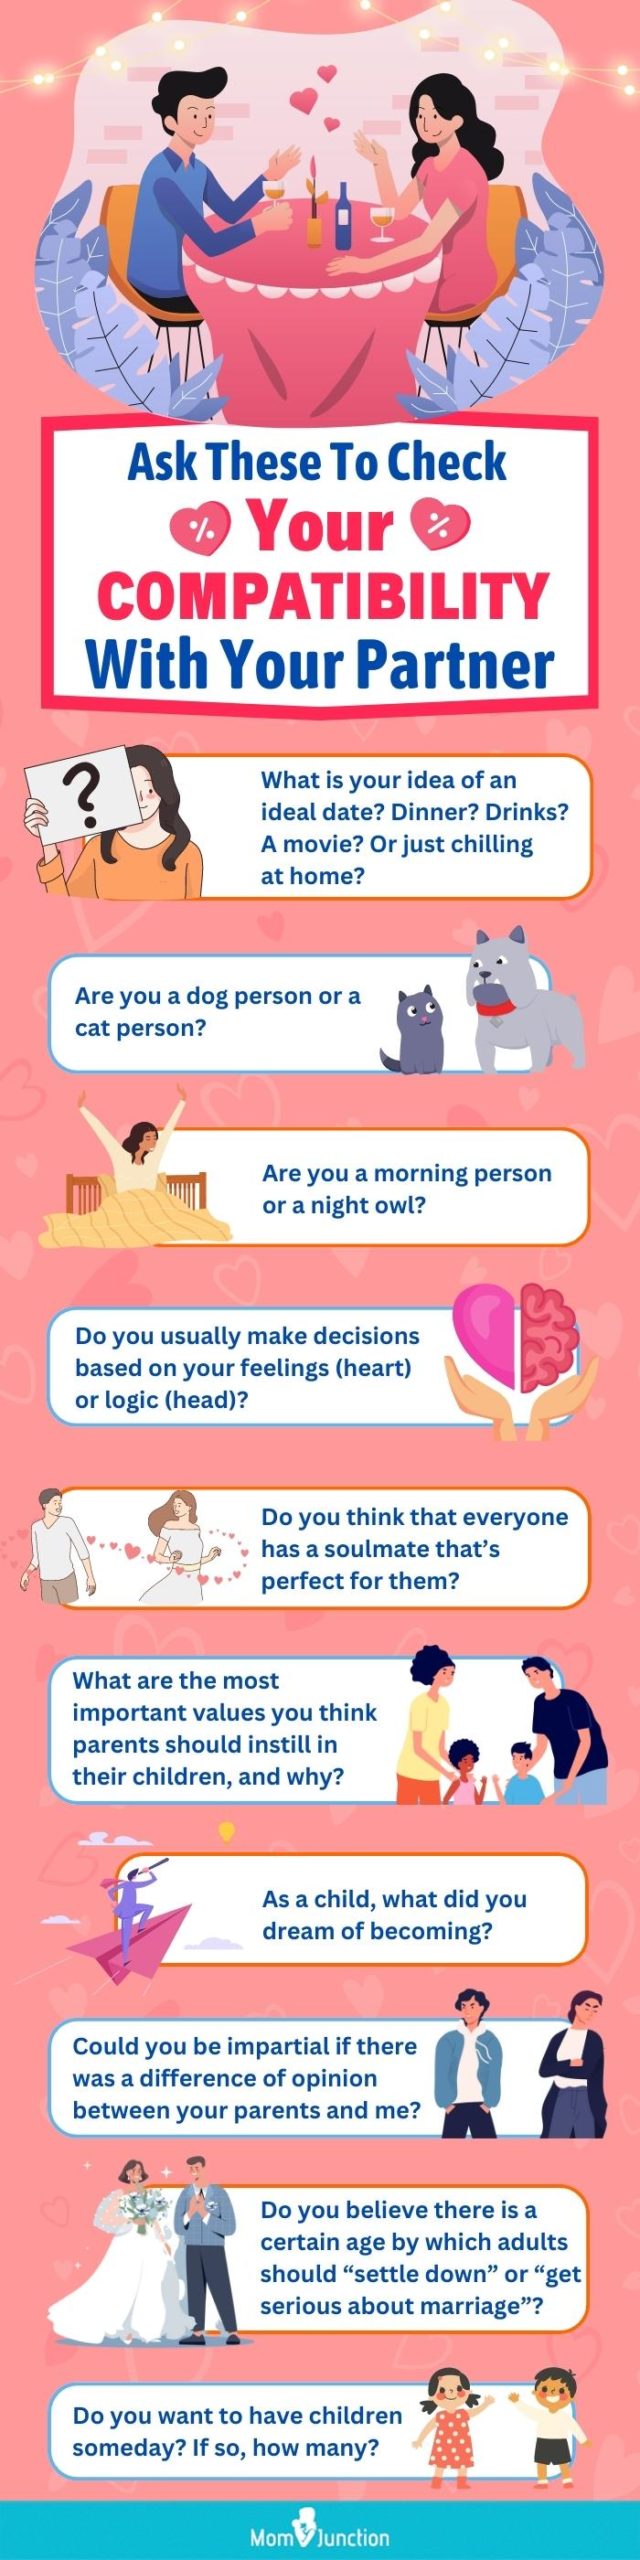 ask these to check your compatibility with your partner (infographic)